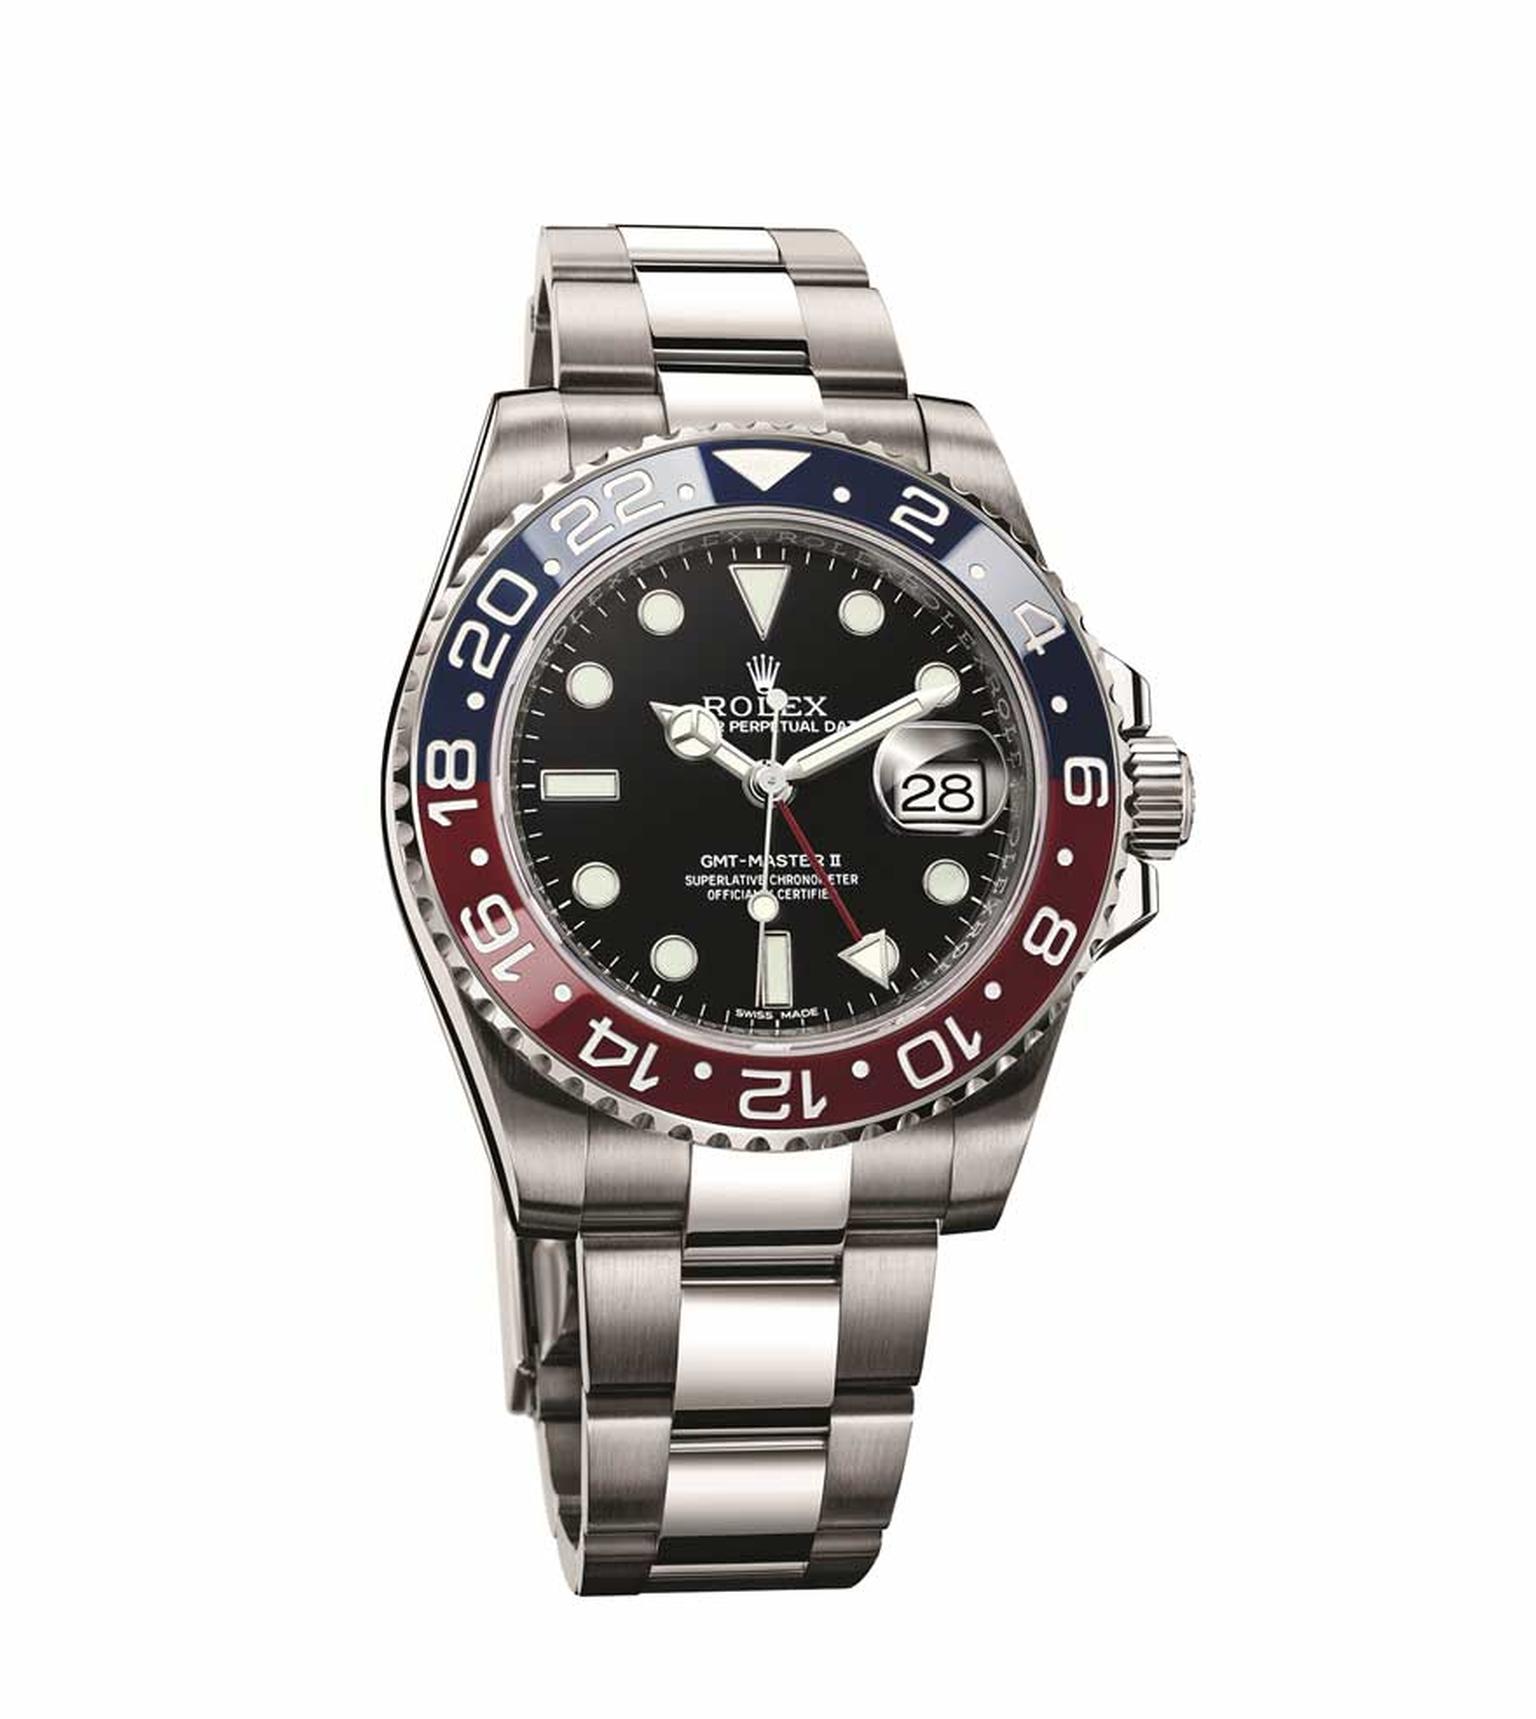 The Rolex GMT Master watch features a world first with its two-coloured red and blue 'Pepsi' Cerachrom ceramic bezel